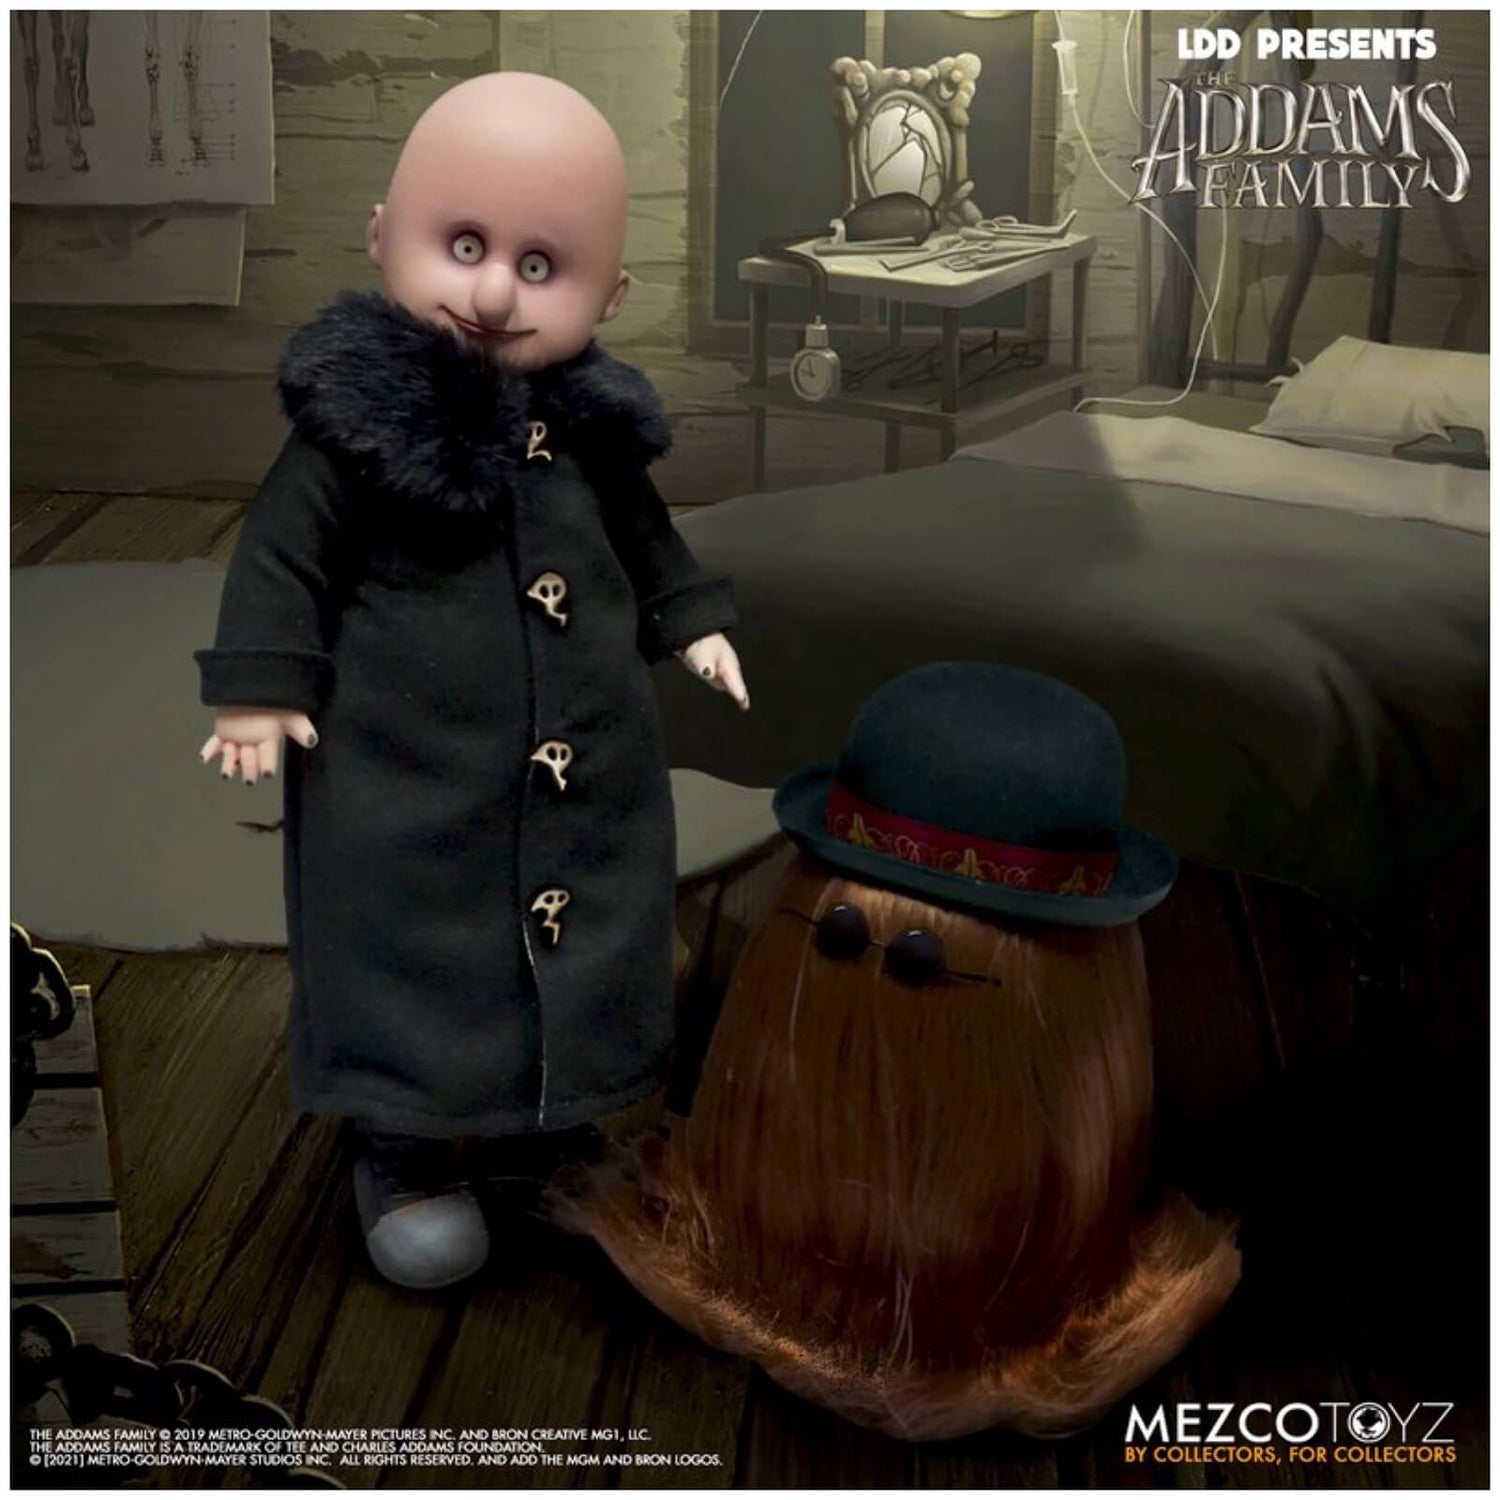 Mezco Living Dead Dolls Presents The Addams Family (2019) - Uncle Fester  and It Merchandise - Zavvi US